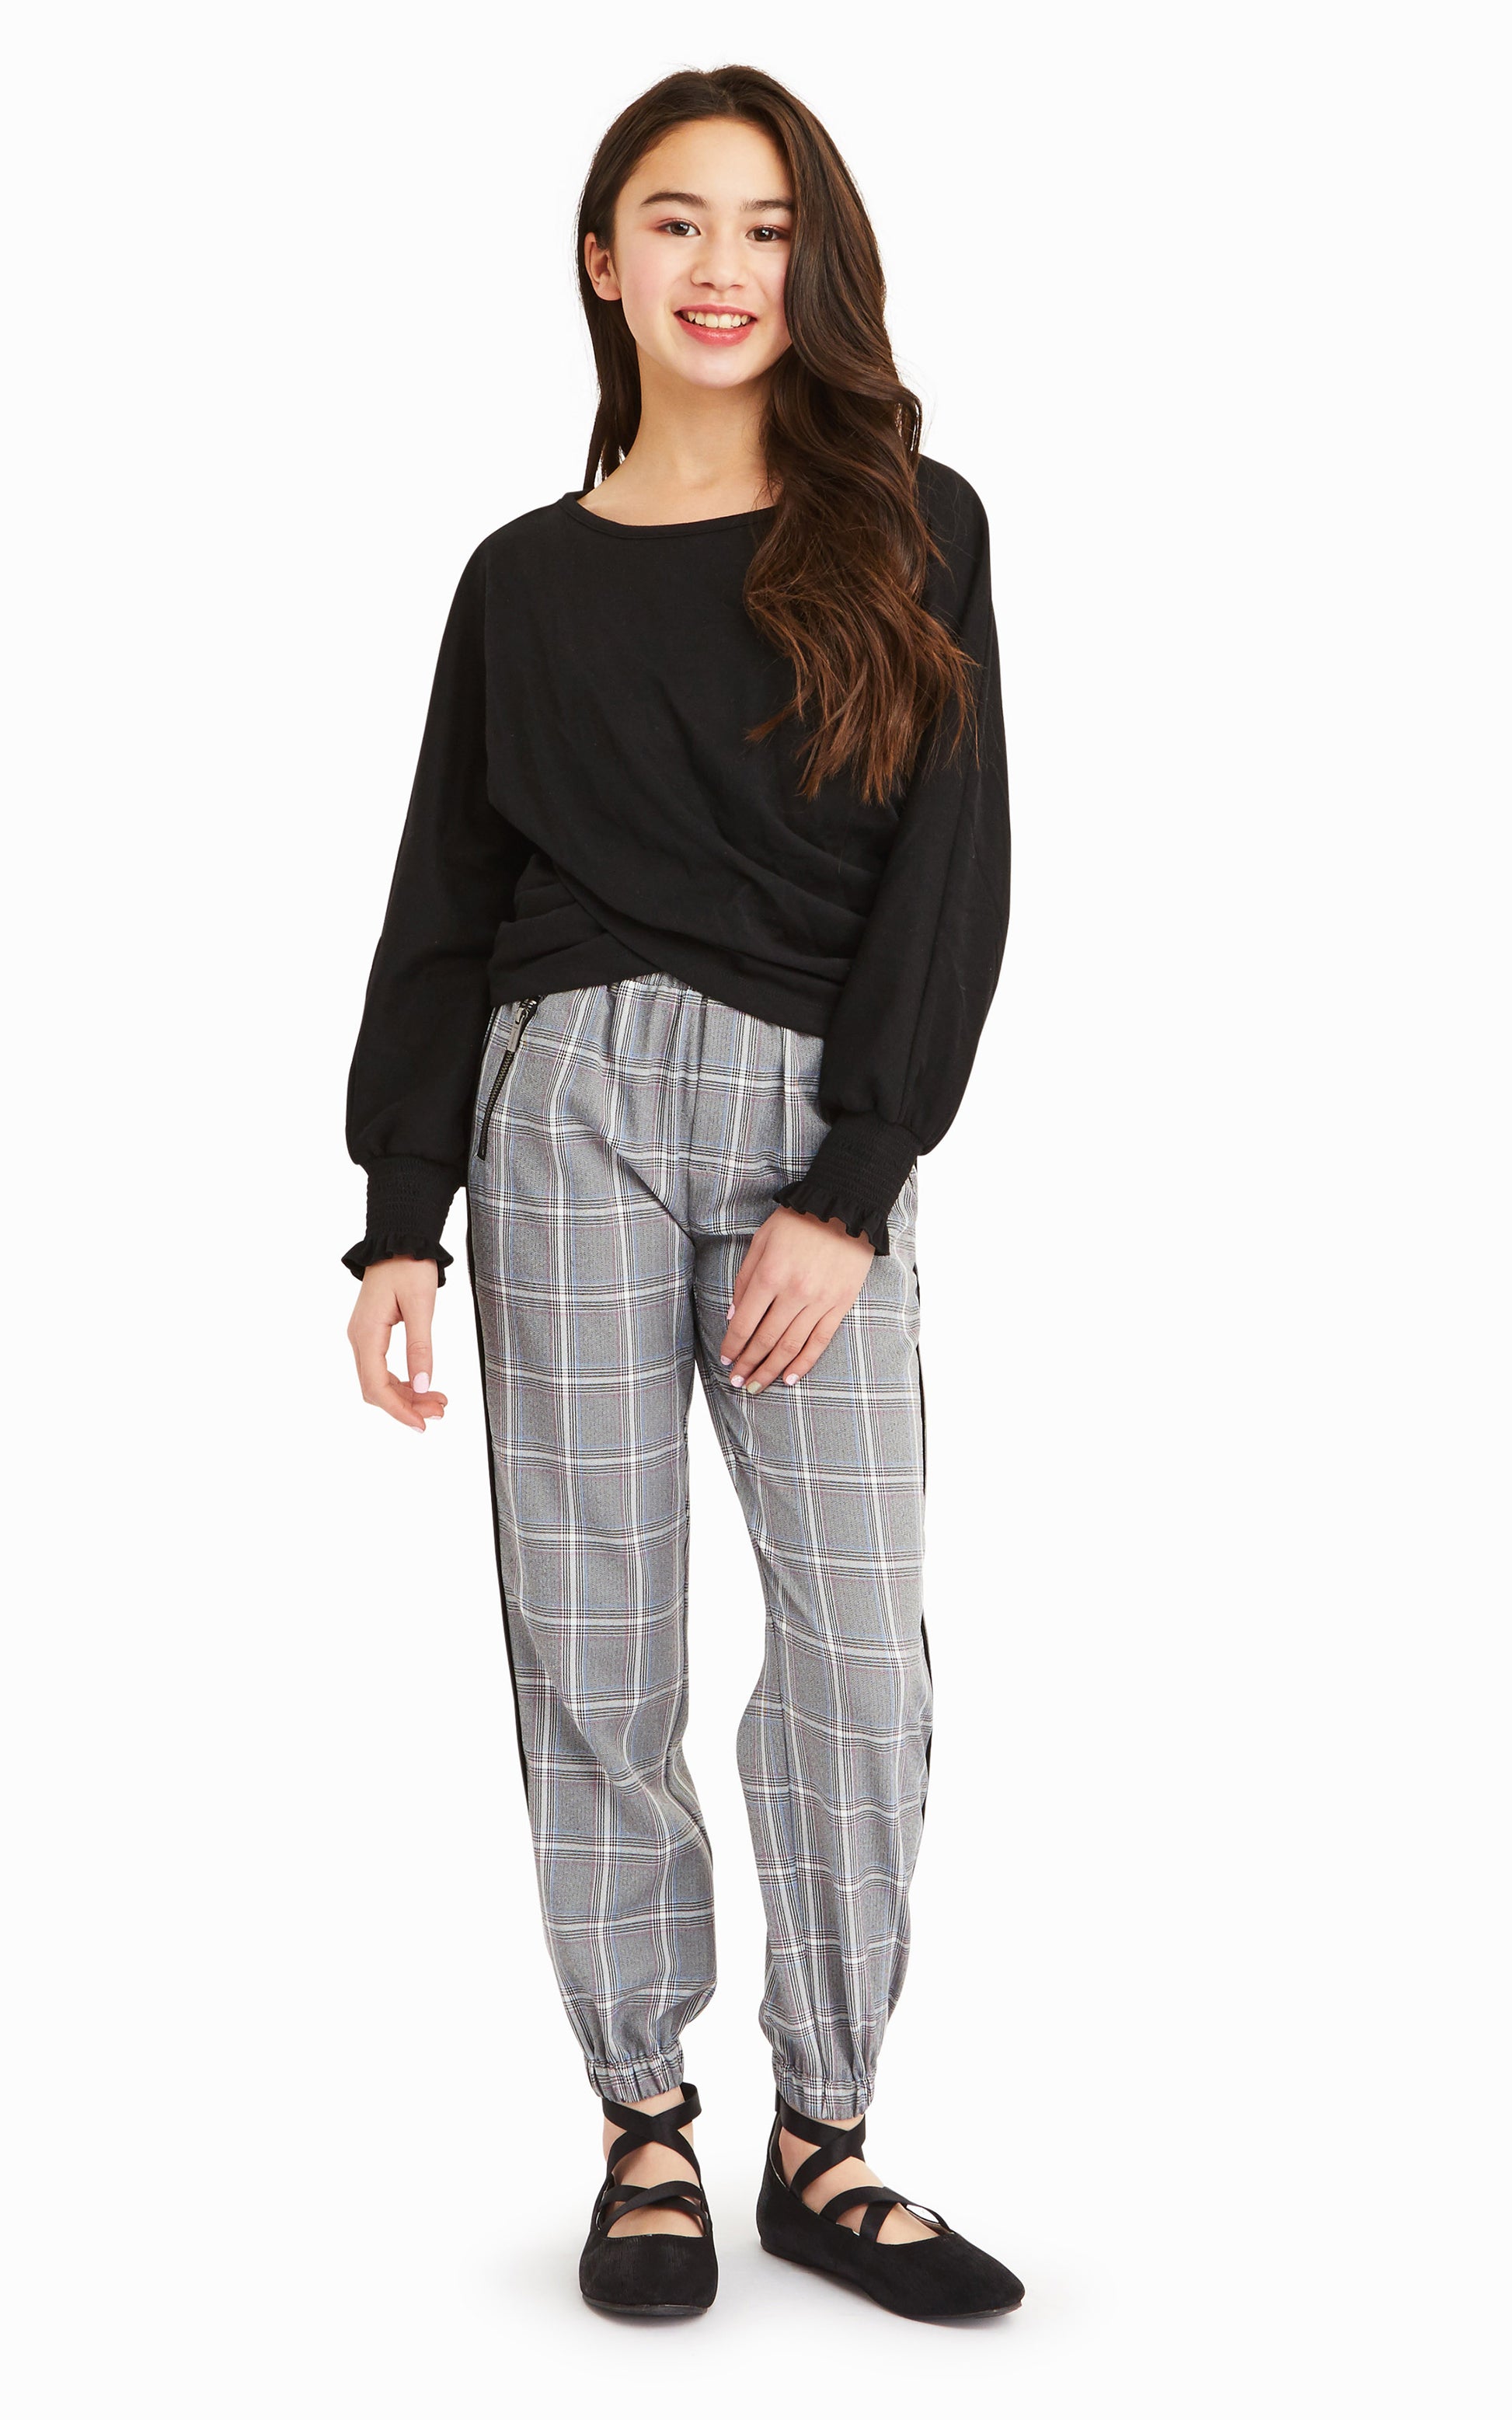 Girl wearing long-sleeve black top with gray, white and black check pattern joggers.